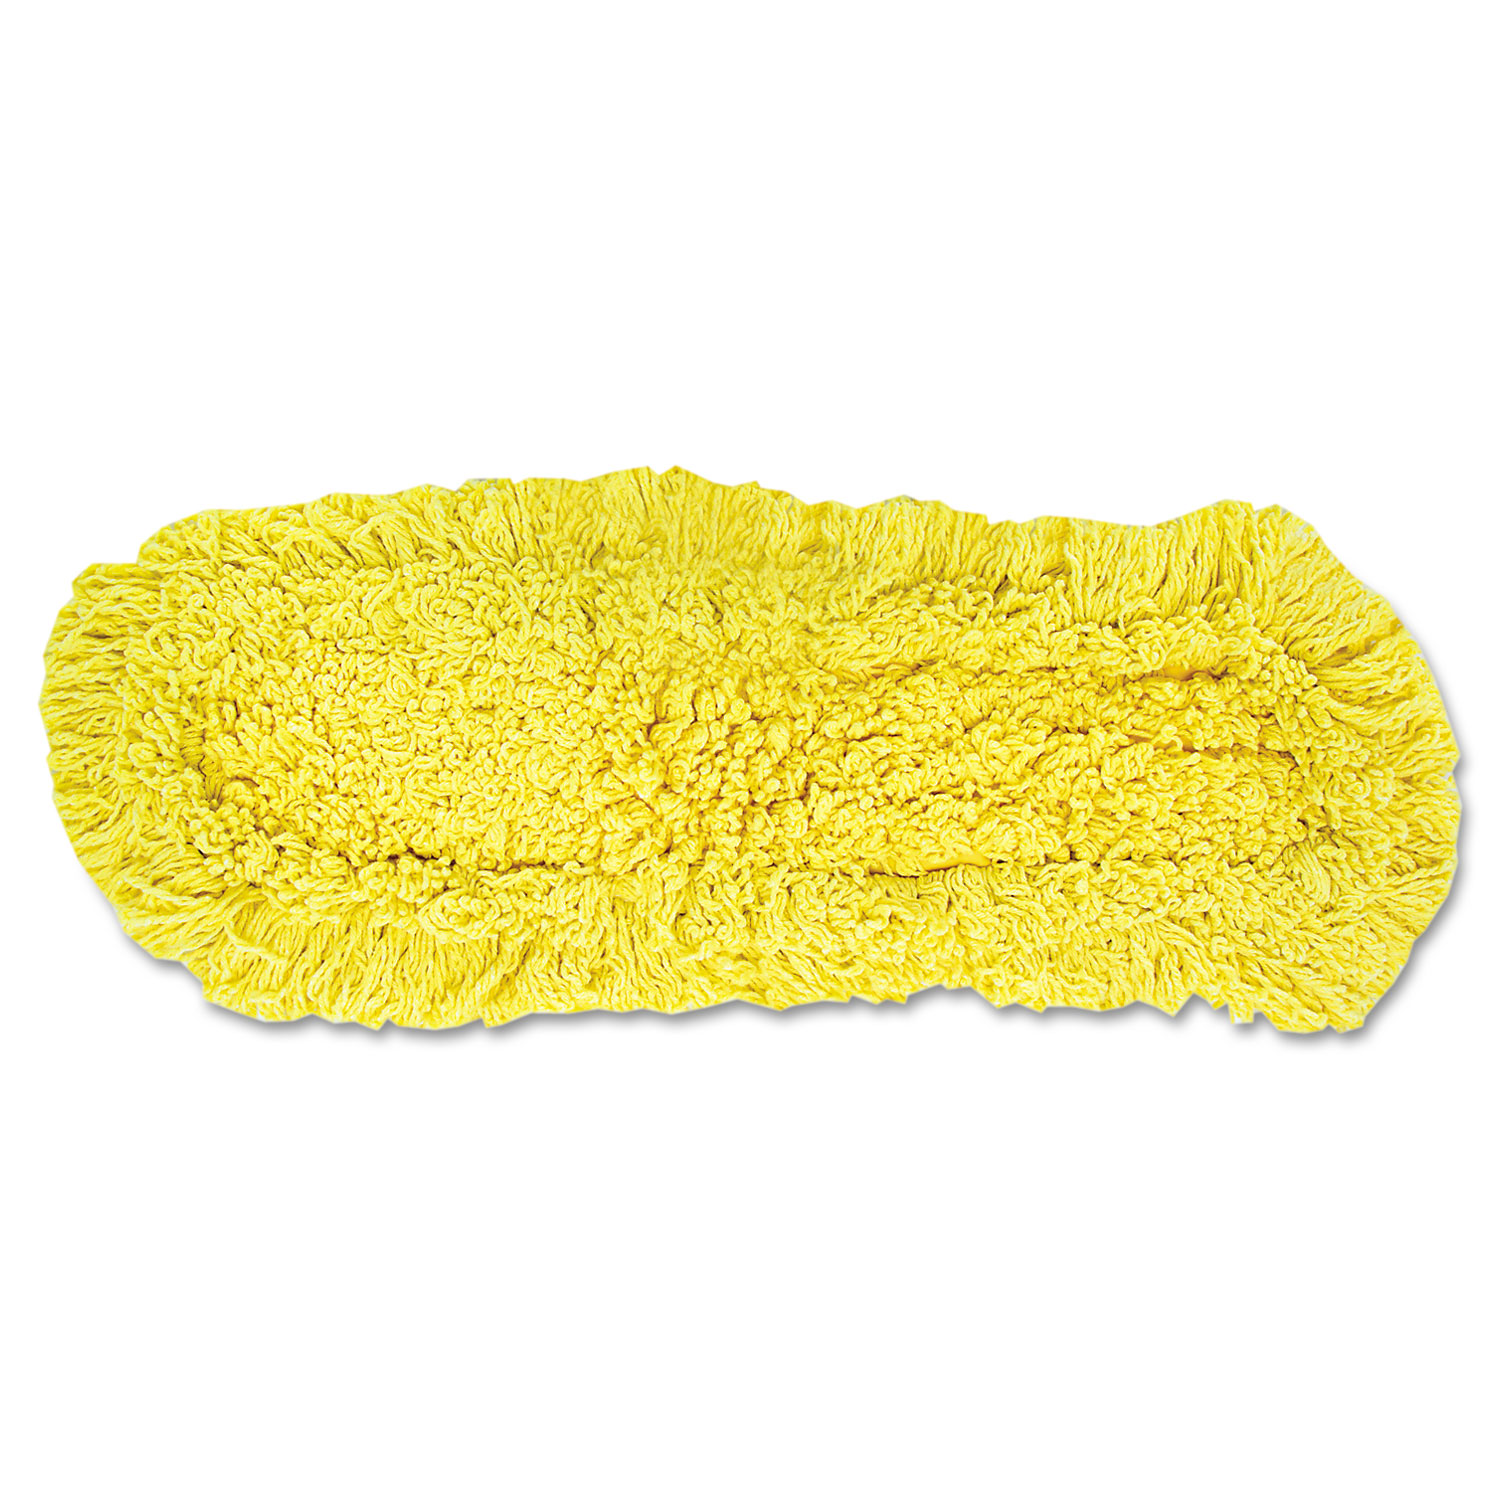  Rubbermaid Commercial FGJ15200YL00 Trapper Commercial Dust Mop, Looped-end Launderable, 5 x 18, Yellow (RCPJ15200YEL) 